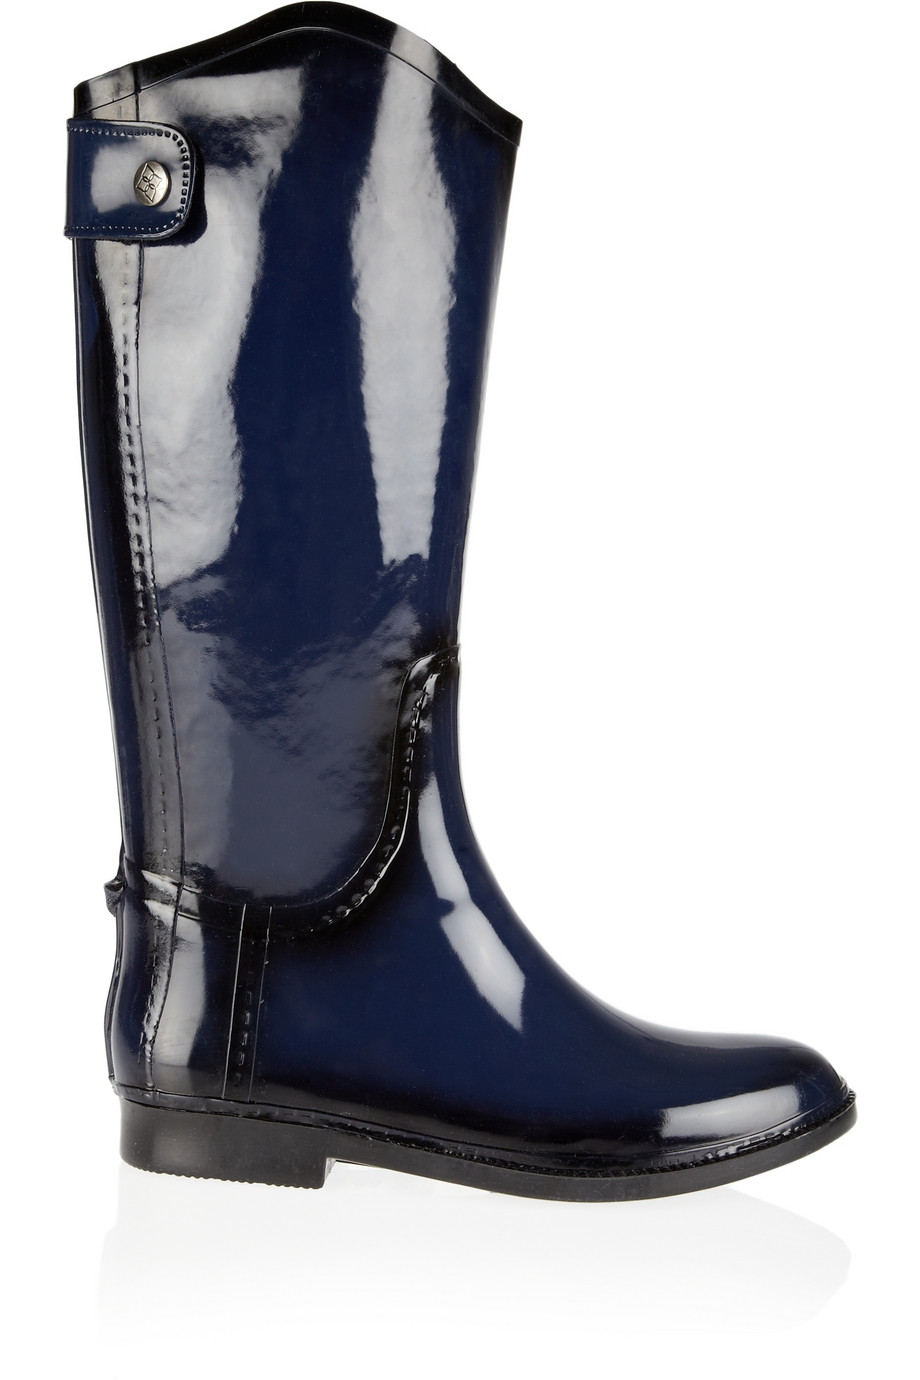 Lyst - Dav Distressed Equestrian Wellington Boots in Blue